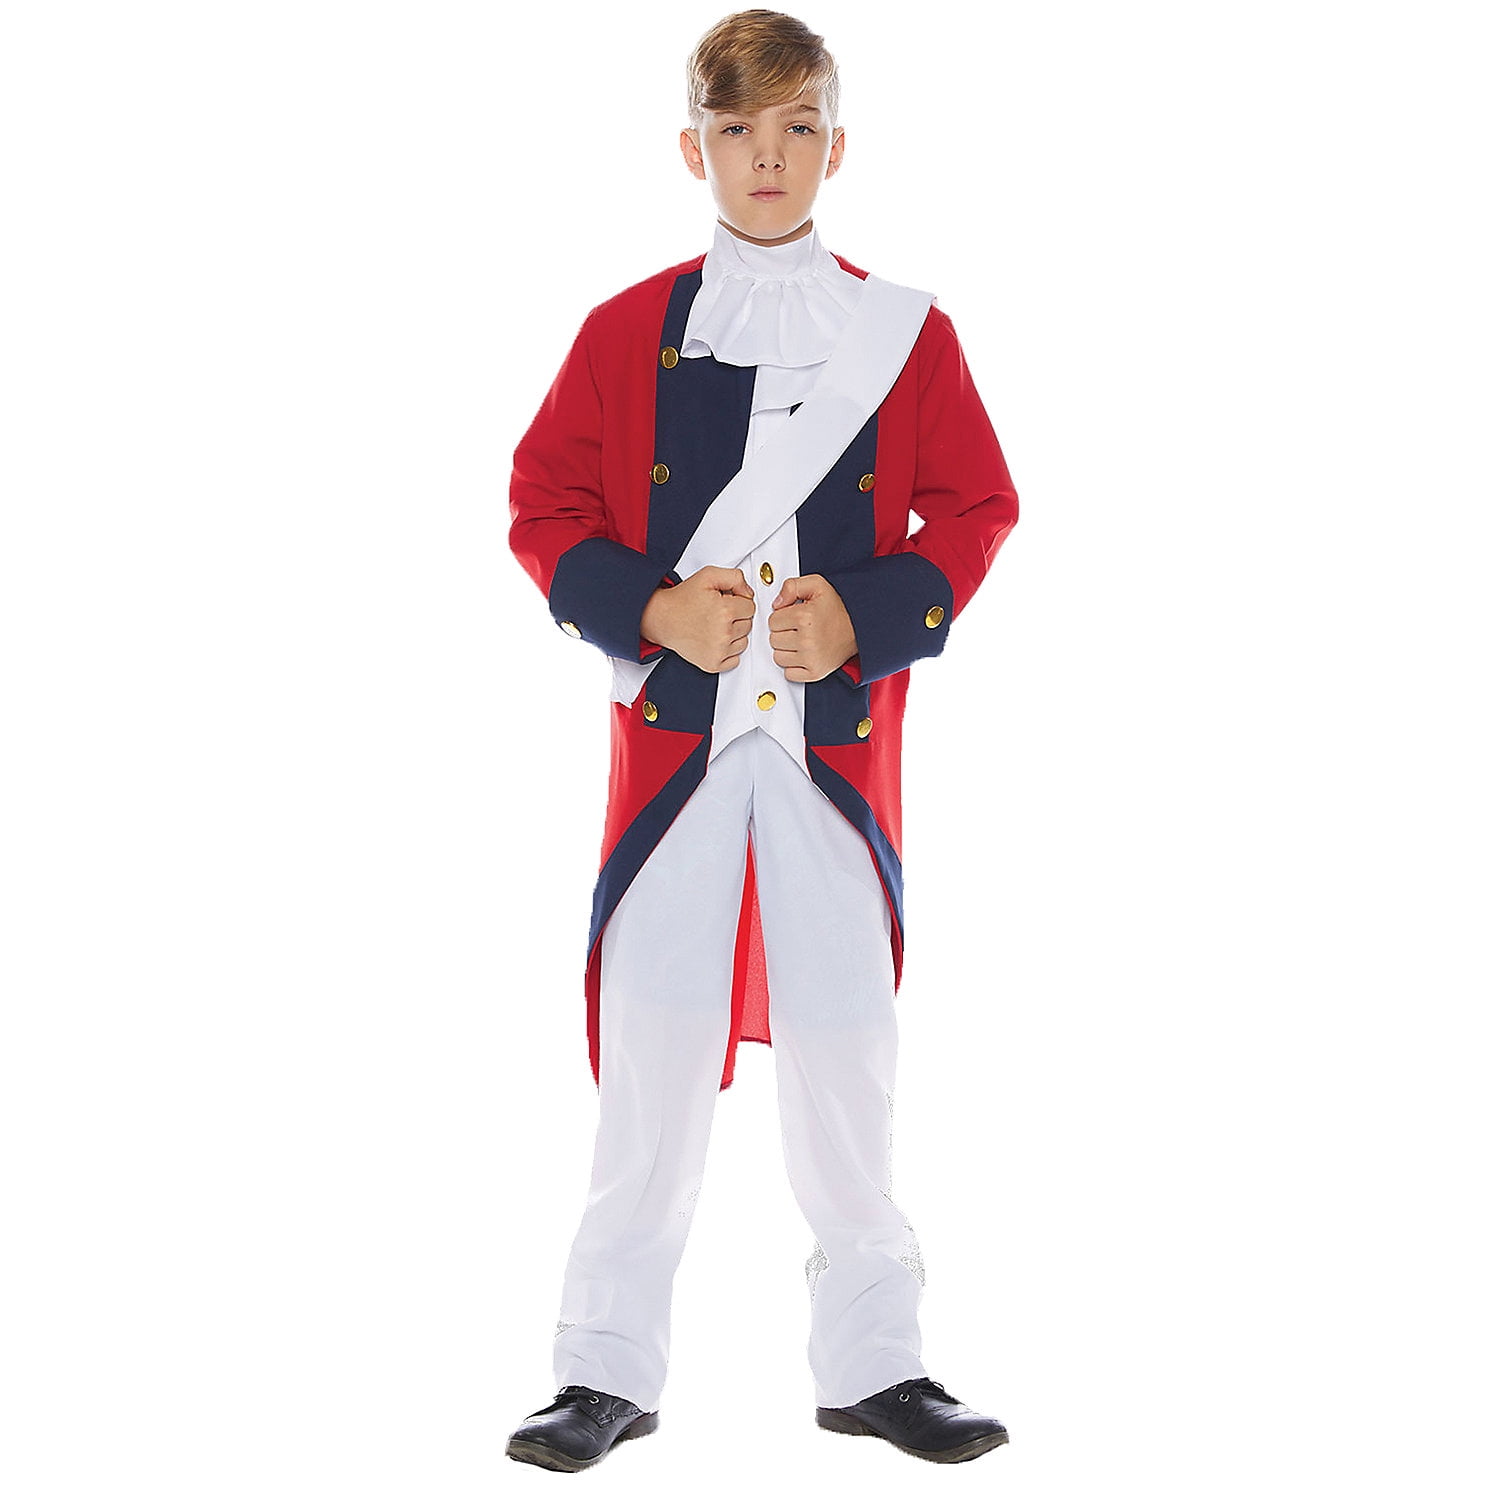 Amscan Combat Soldier Halloween Costume Boys, Small Included Accessories